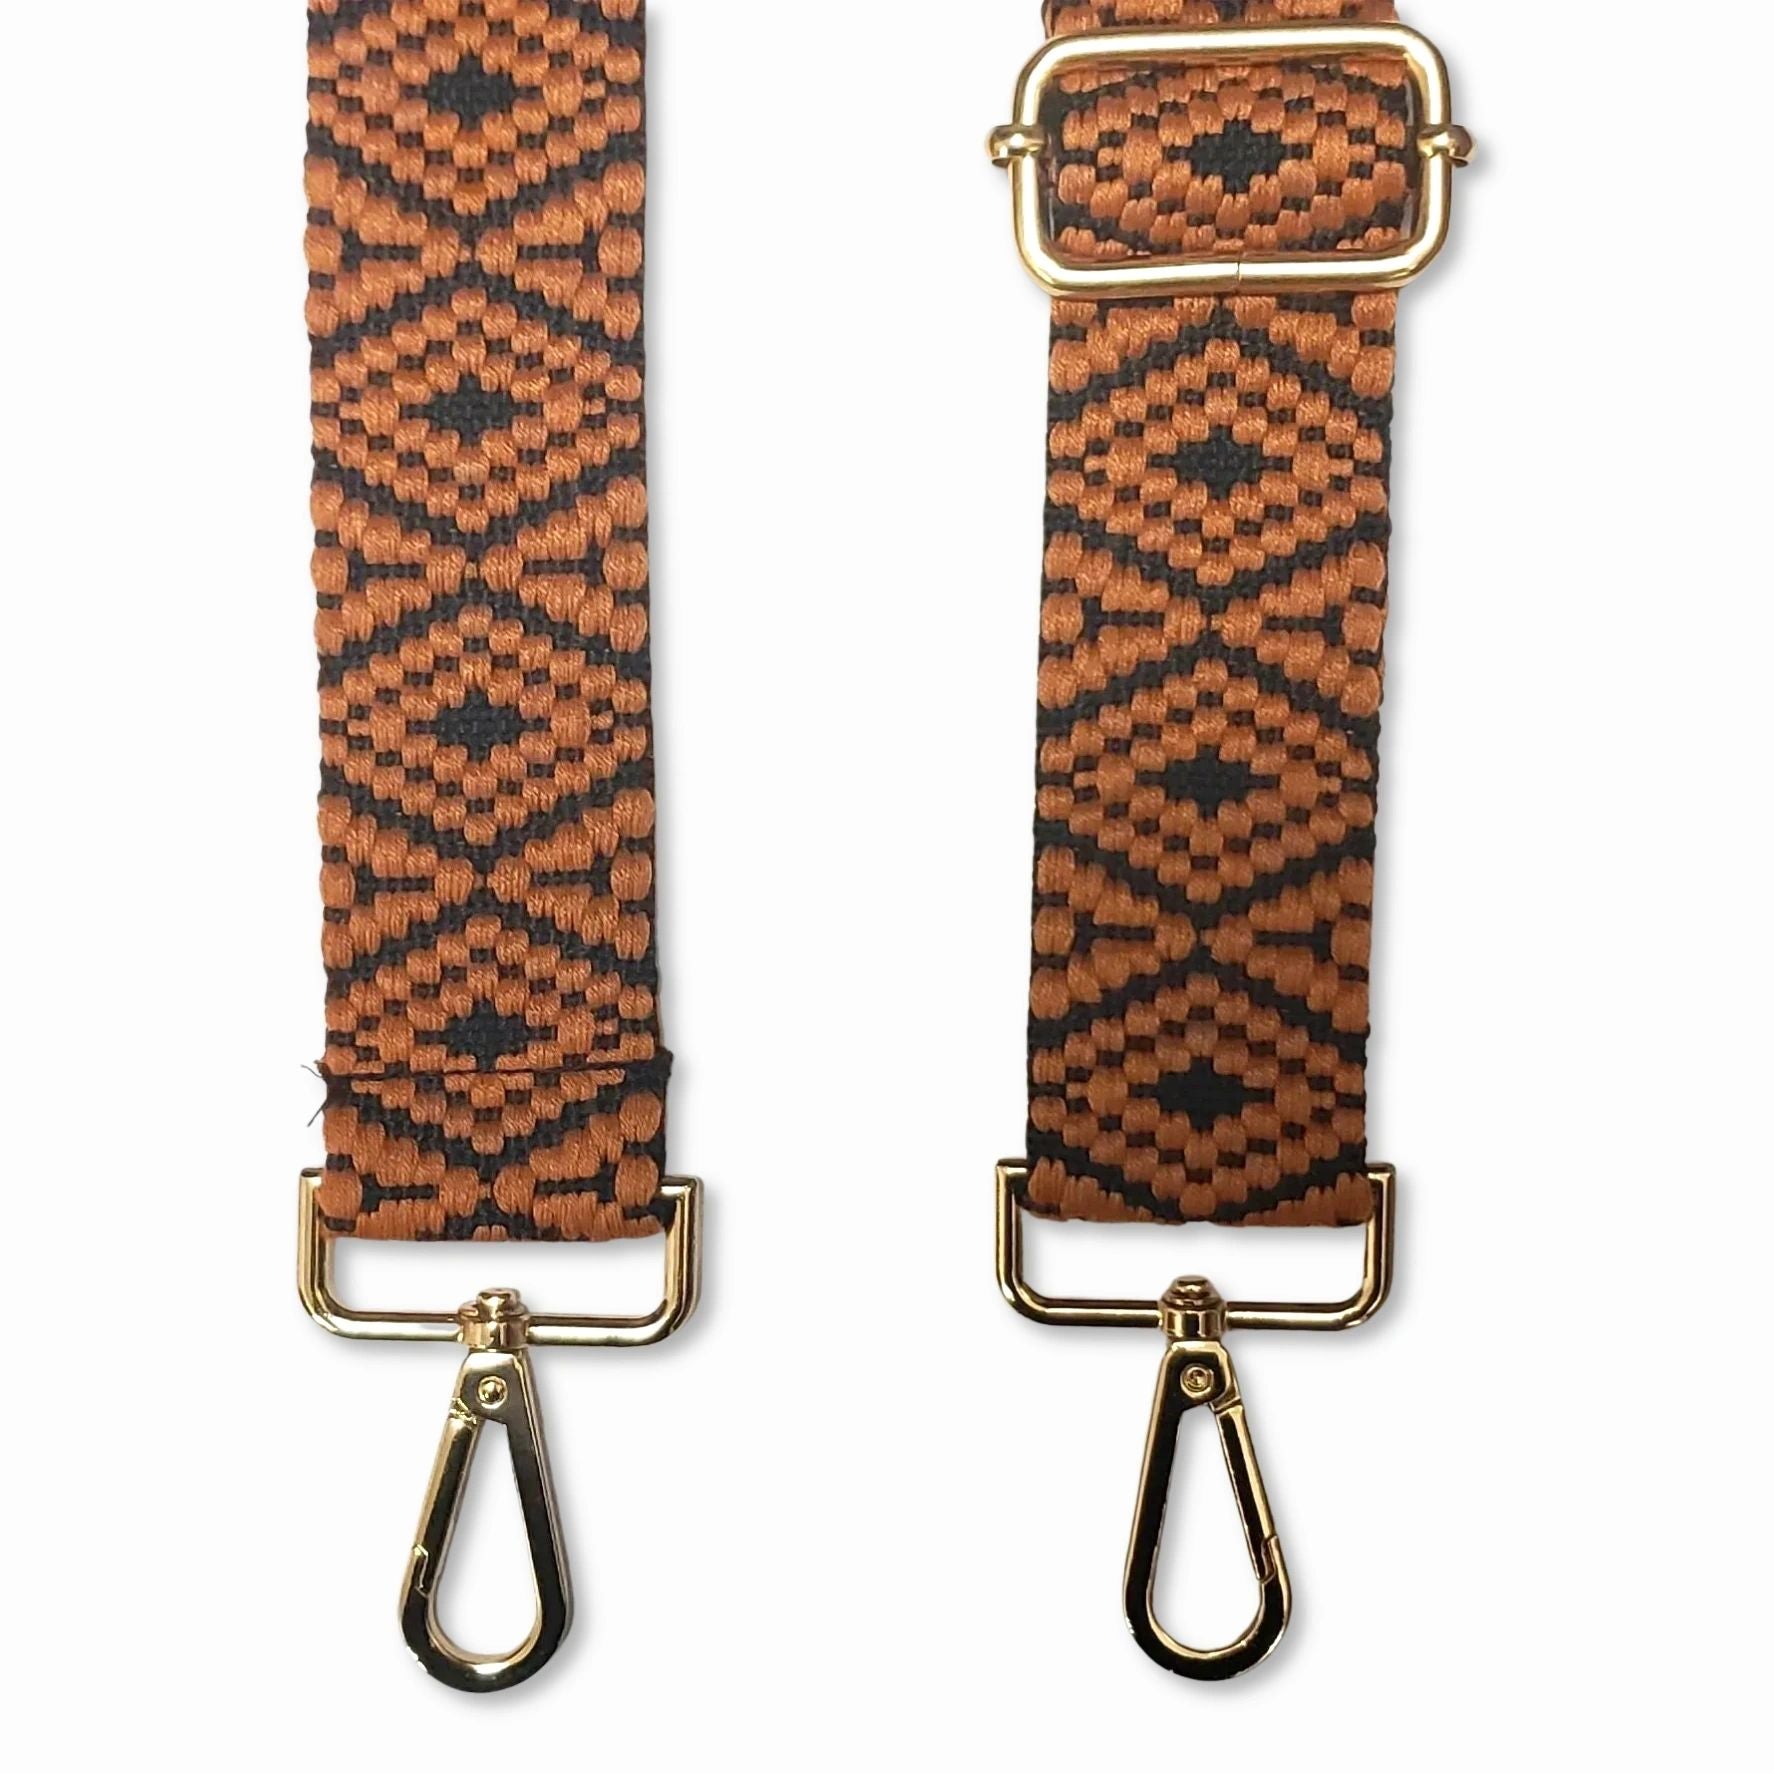 Adjustable black and brown aztec printed strap with golden carabiners 